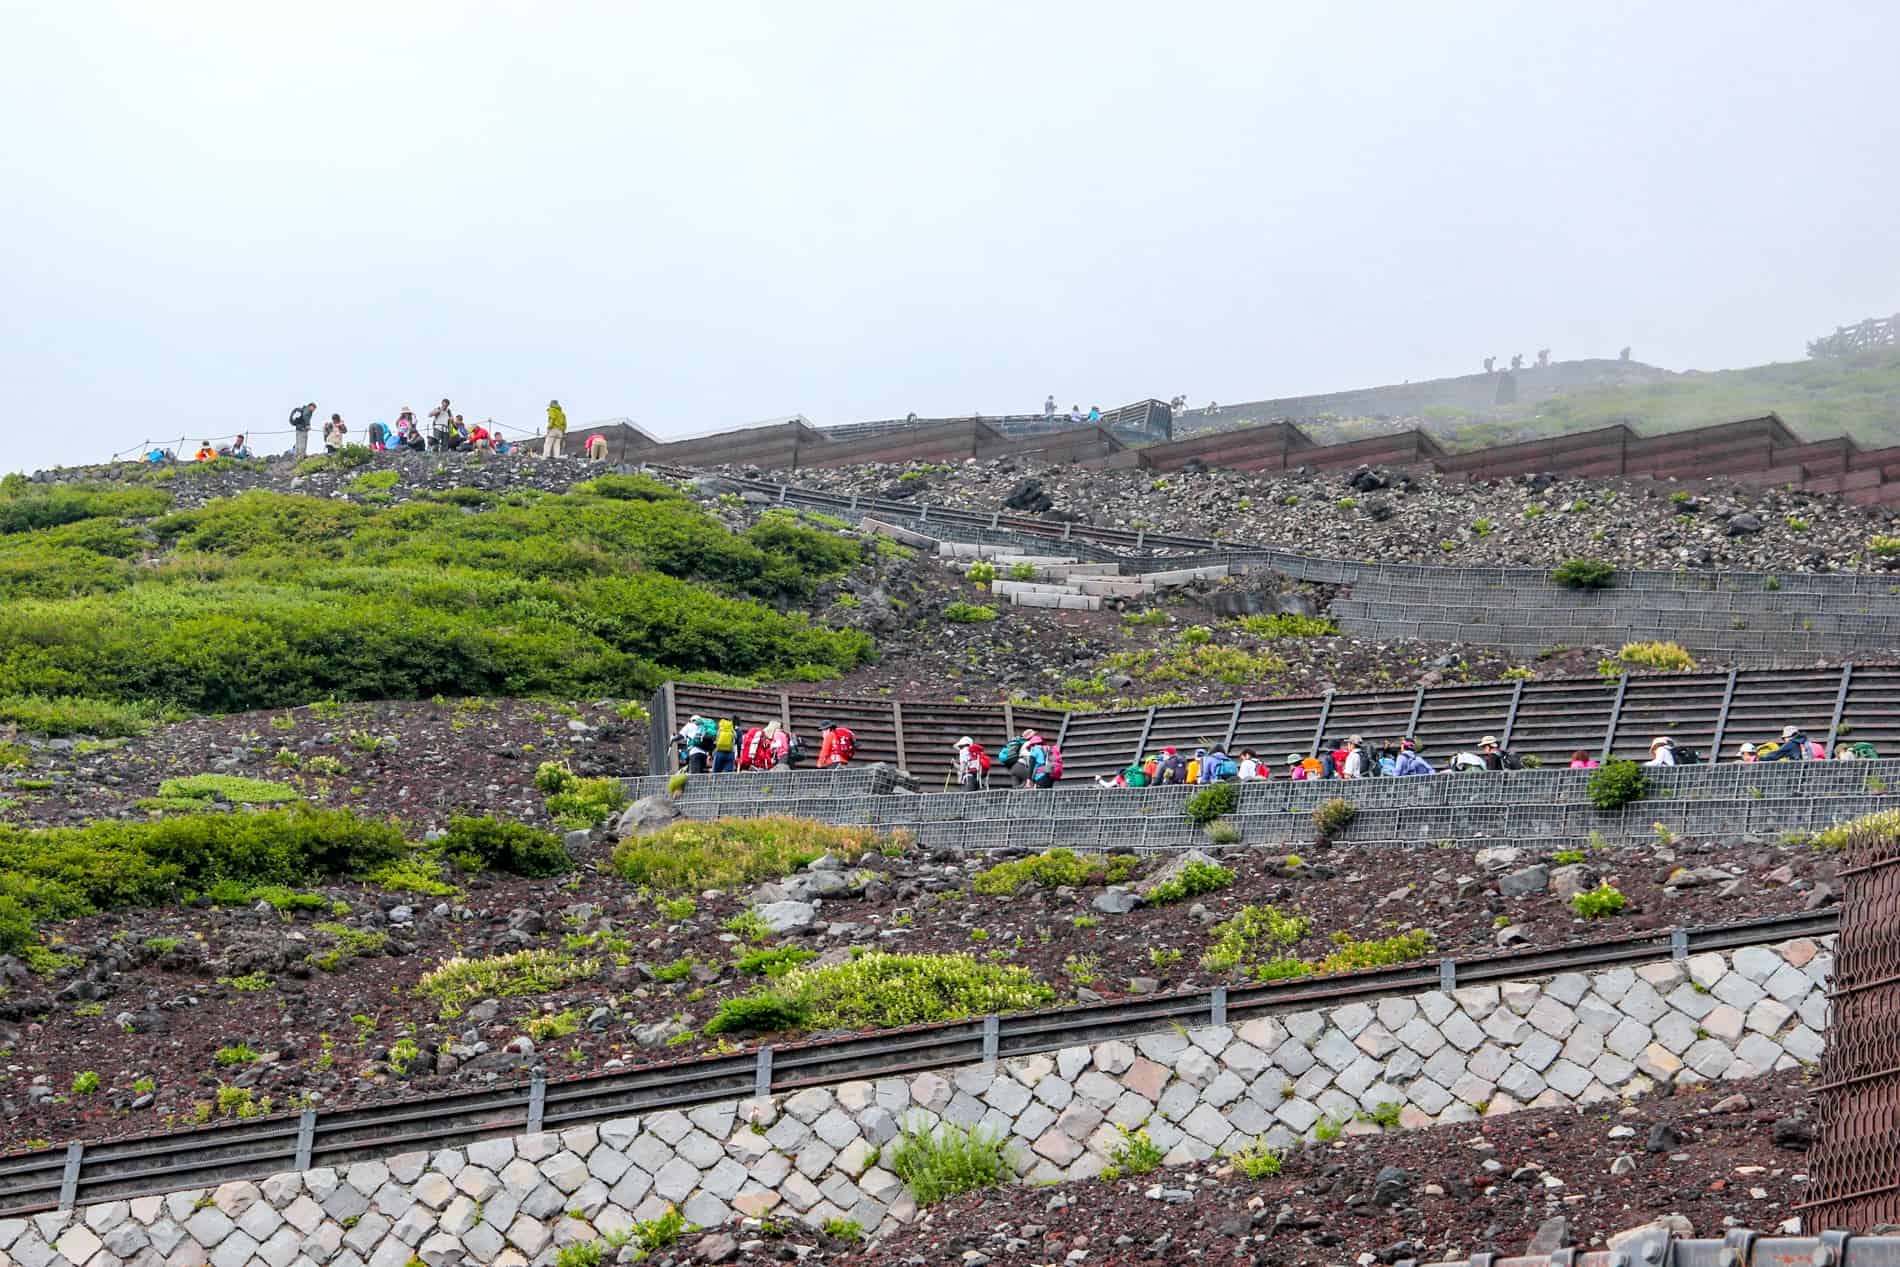 Mountain hikers in multicoloured clothing ascent a zig zag pathway on Mt Fuji, Japan.